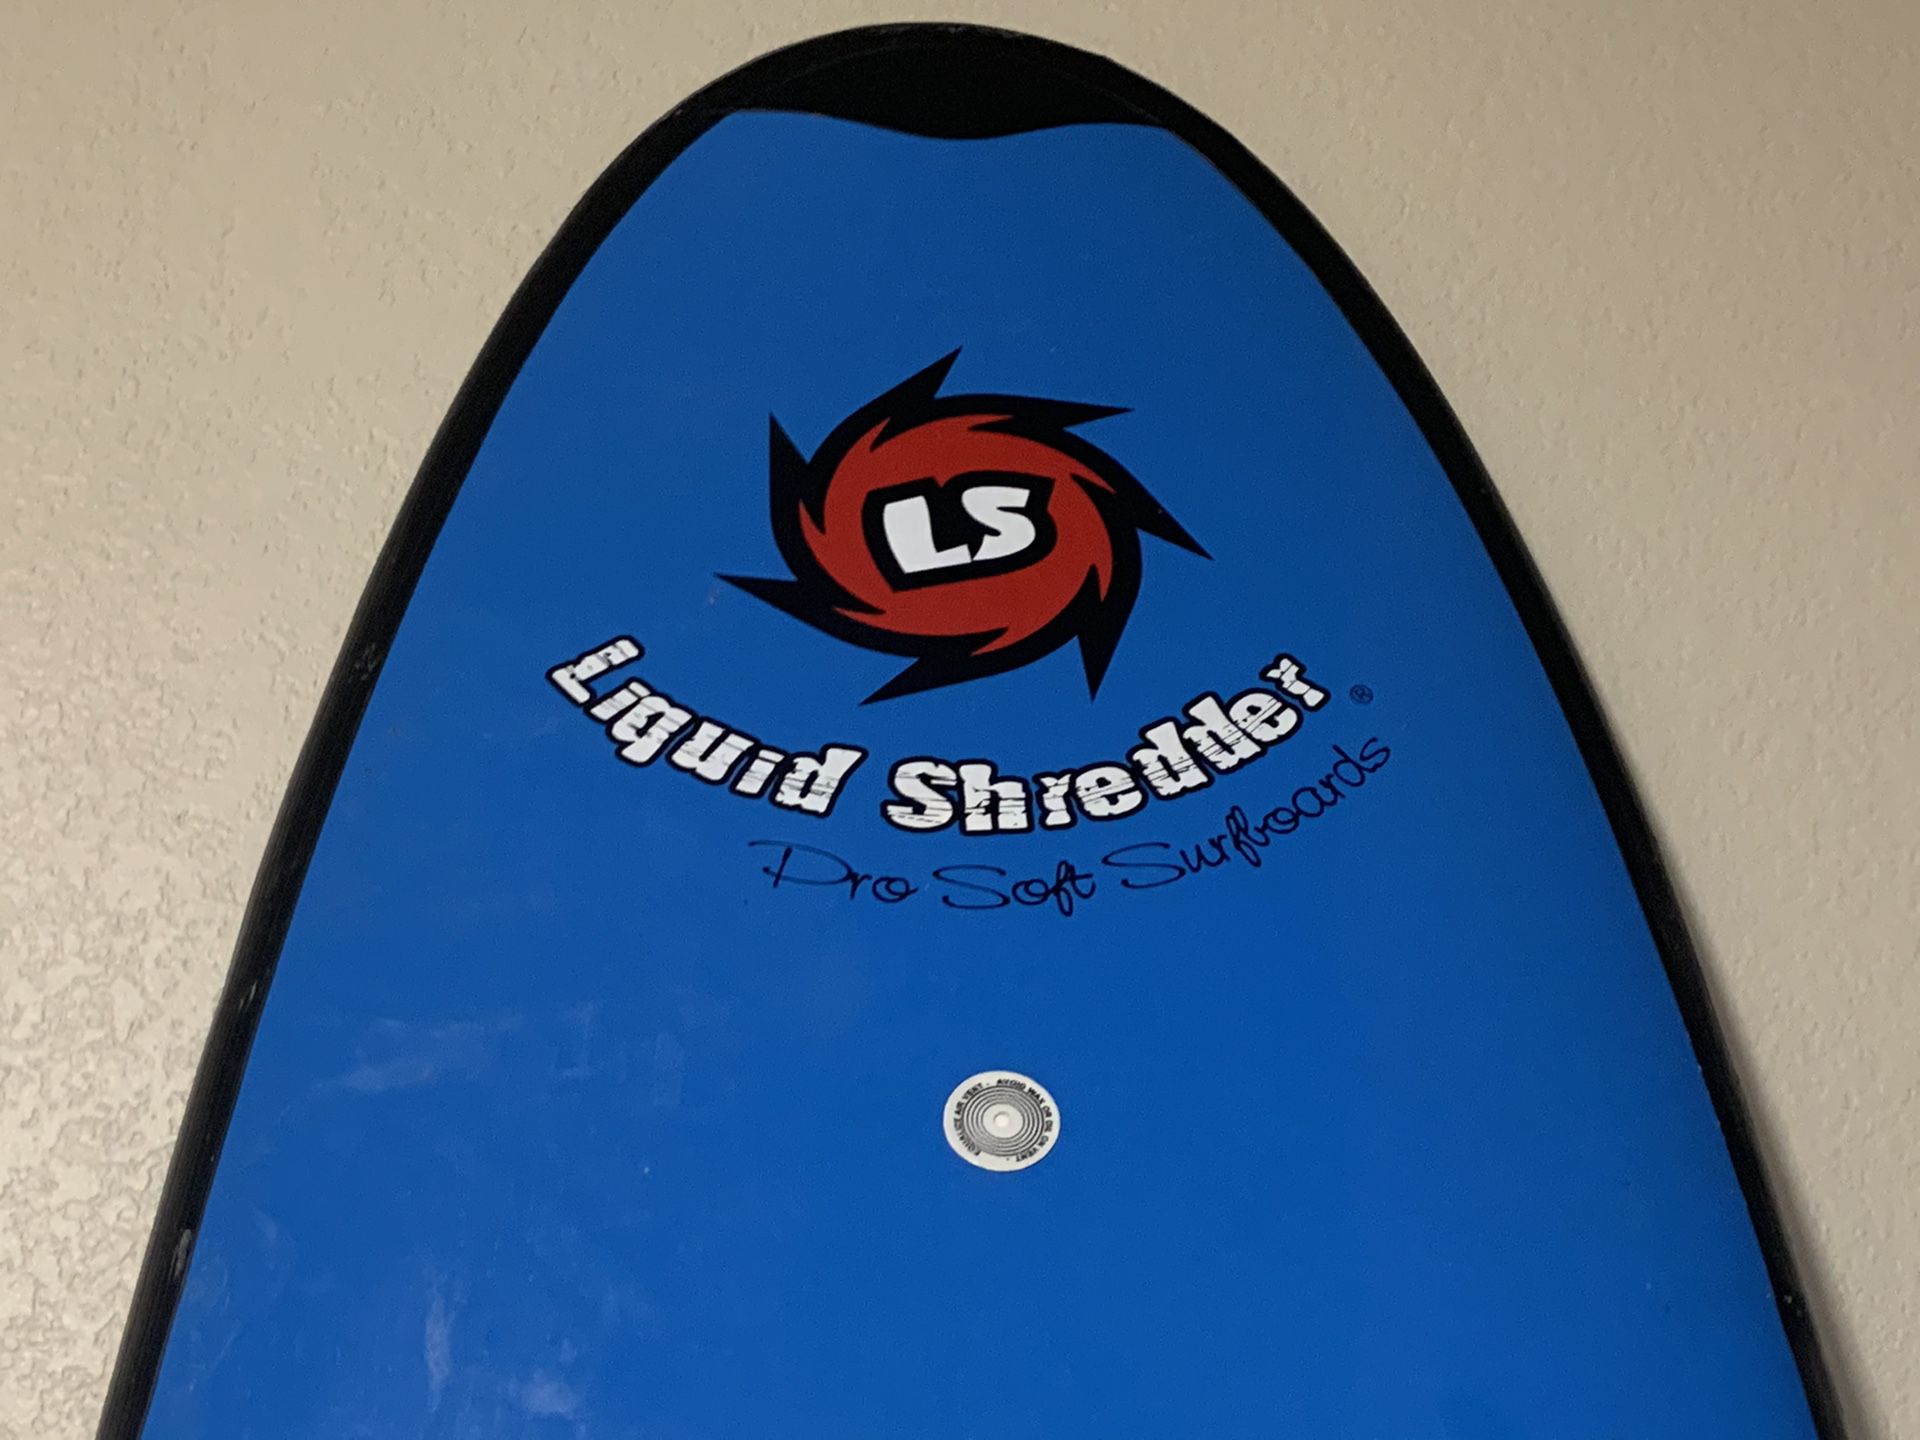 Liquid Shredder -Pro soft surfboard 10Ft best offer this week will be accepted